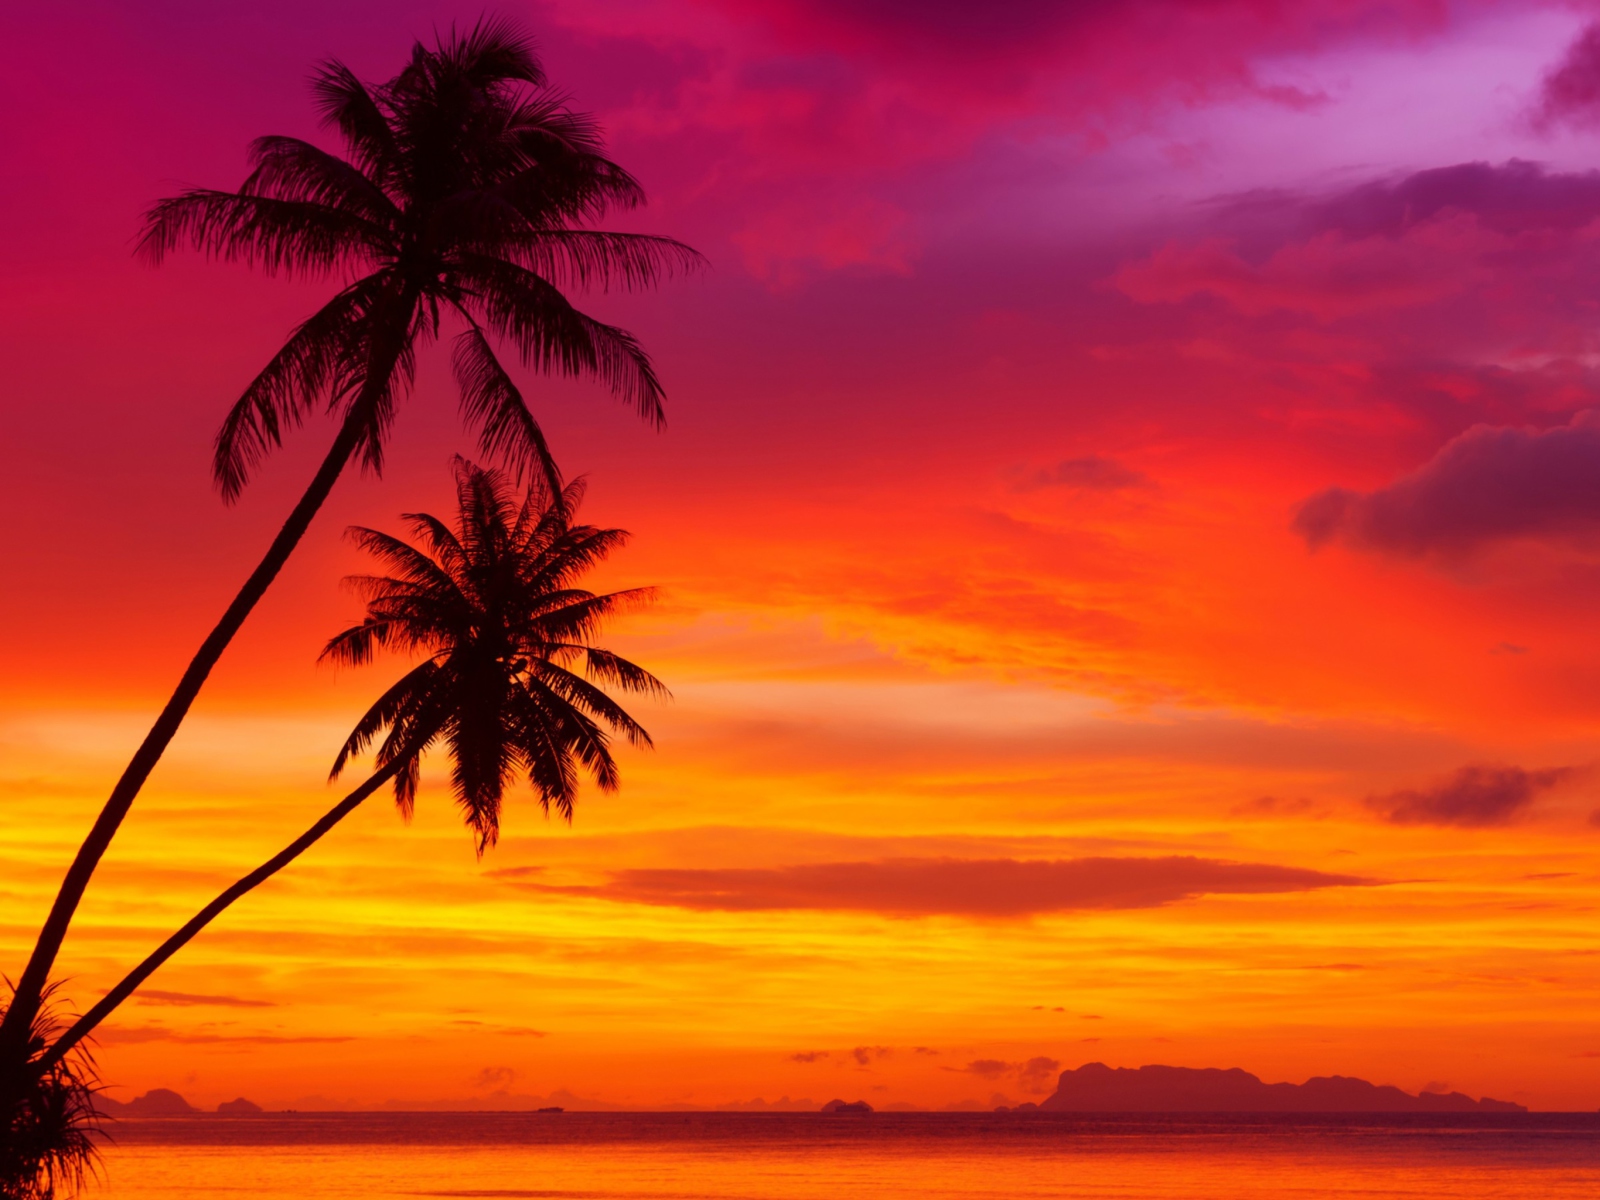 Amazing Pink And Orange Tropical Sunset wallpaper 1600x1200